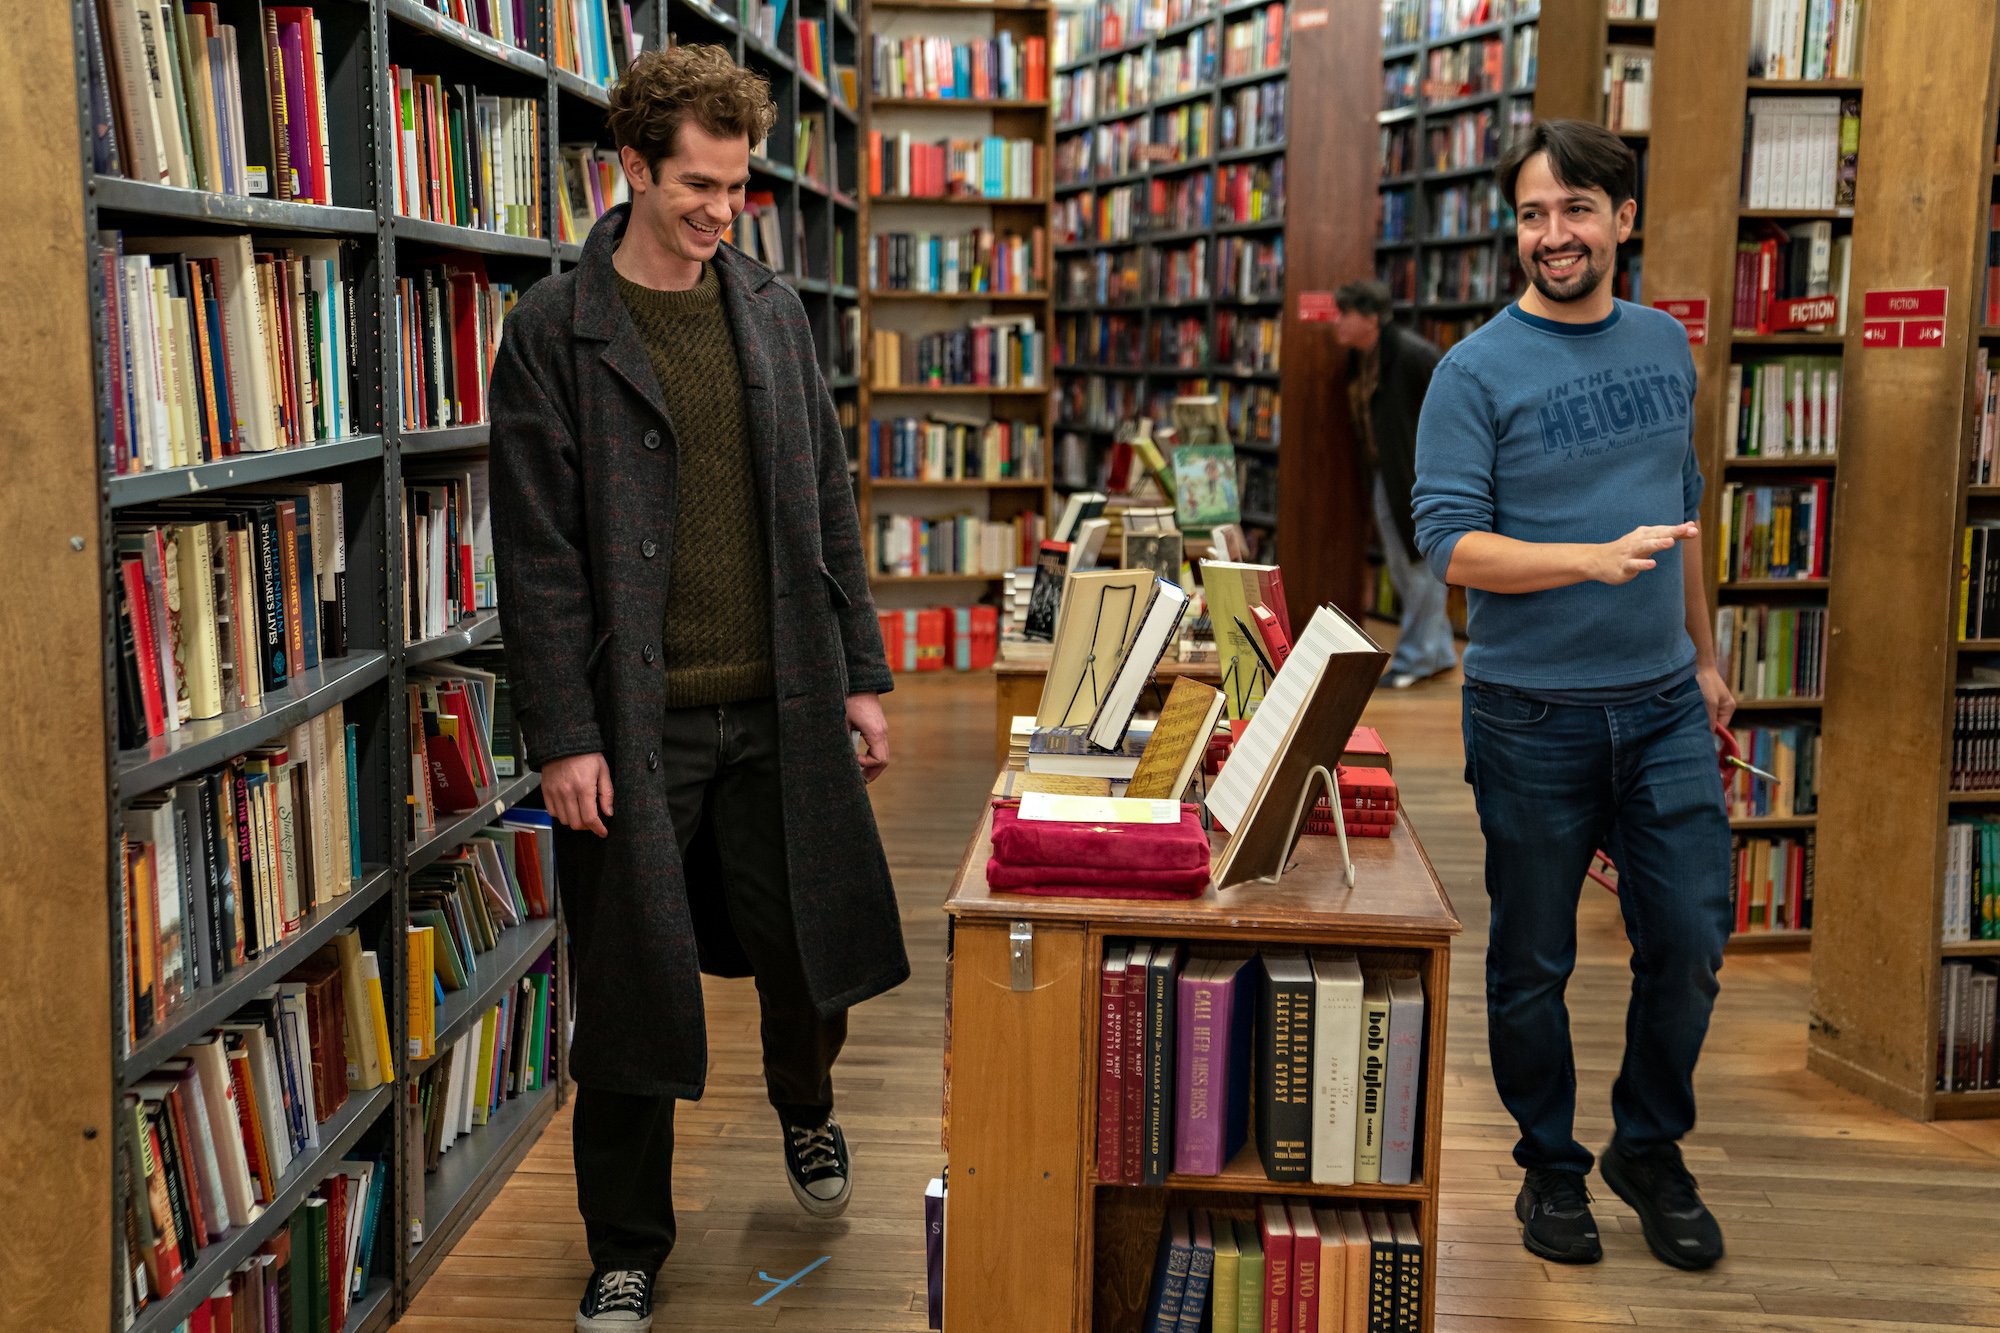 Andrew Garfield and Lin-Manuel Miranda on set of 'Tick, Tick... BOOM!' They walk through a book store smiling. Garfield wears a green sweater, grey wool coat, jeans, and black Converses. Miranda wears a blue long-sleeve shirt that says 'In The Heights' with jeans and sneakers. They're surrounded by large bookshelves filled with books.